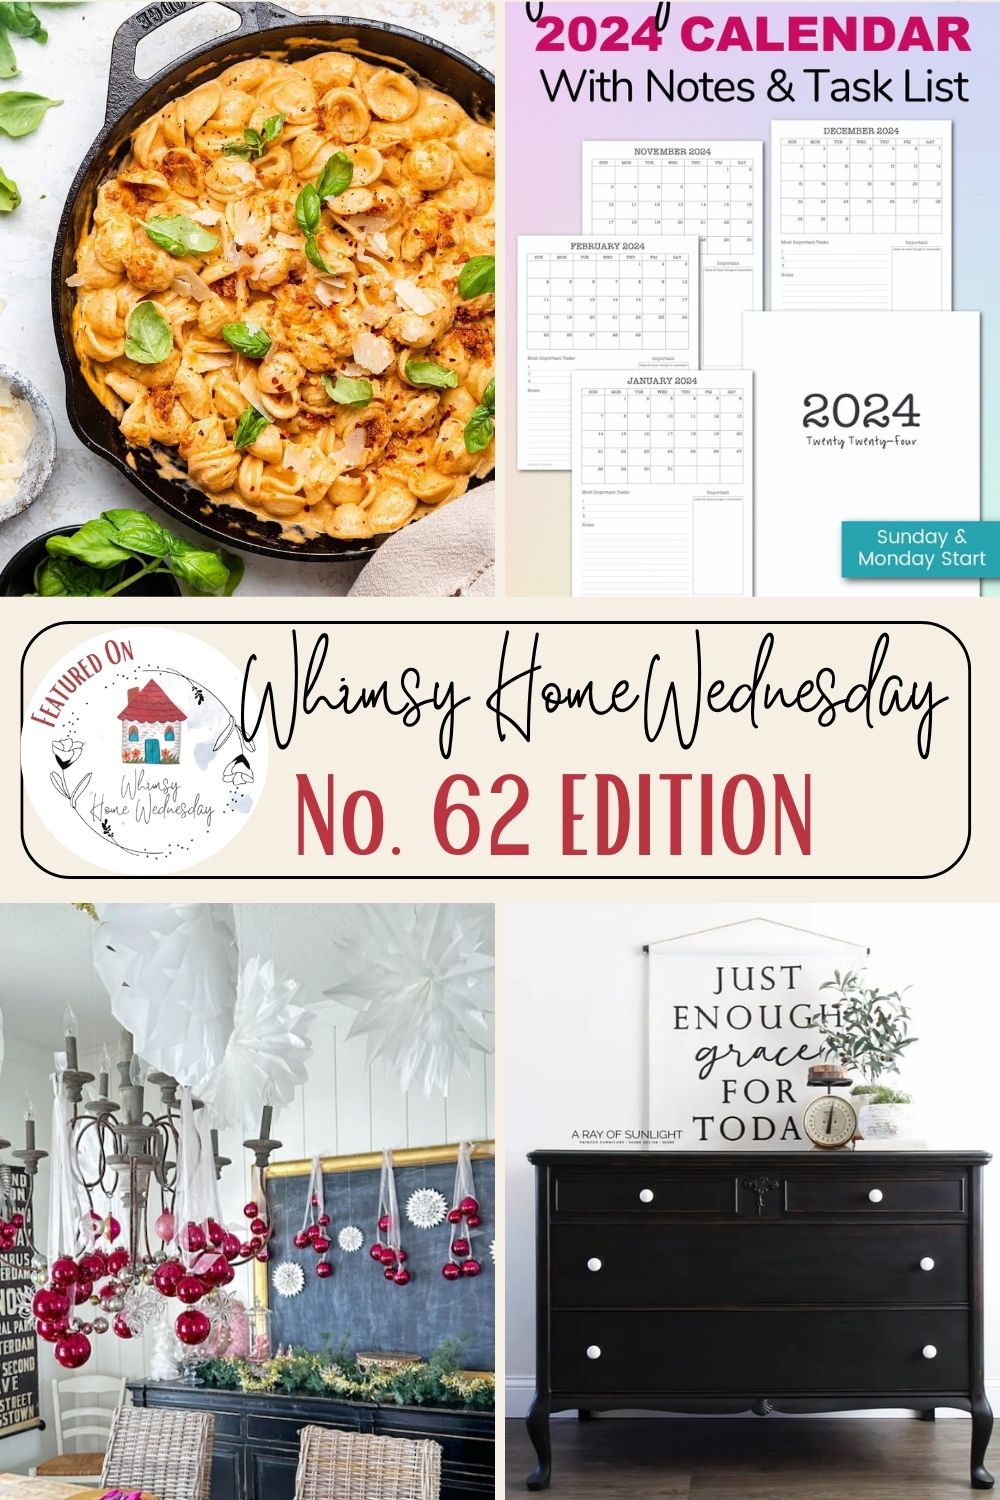 Join us on Whimsy Home Wednesday Blog Link Party No. 62 and see host projects, the features from the previous week and link up your posts!